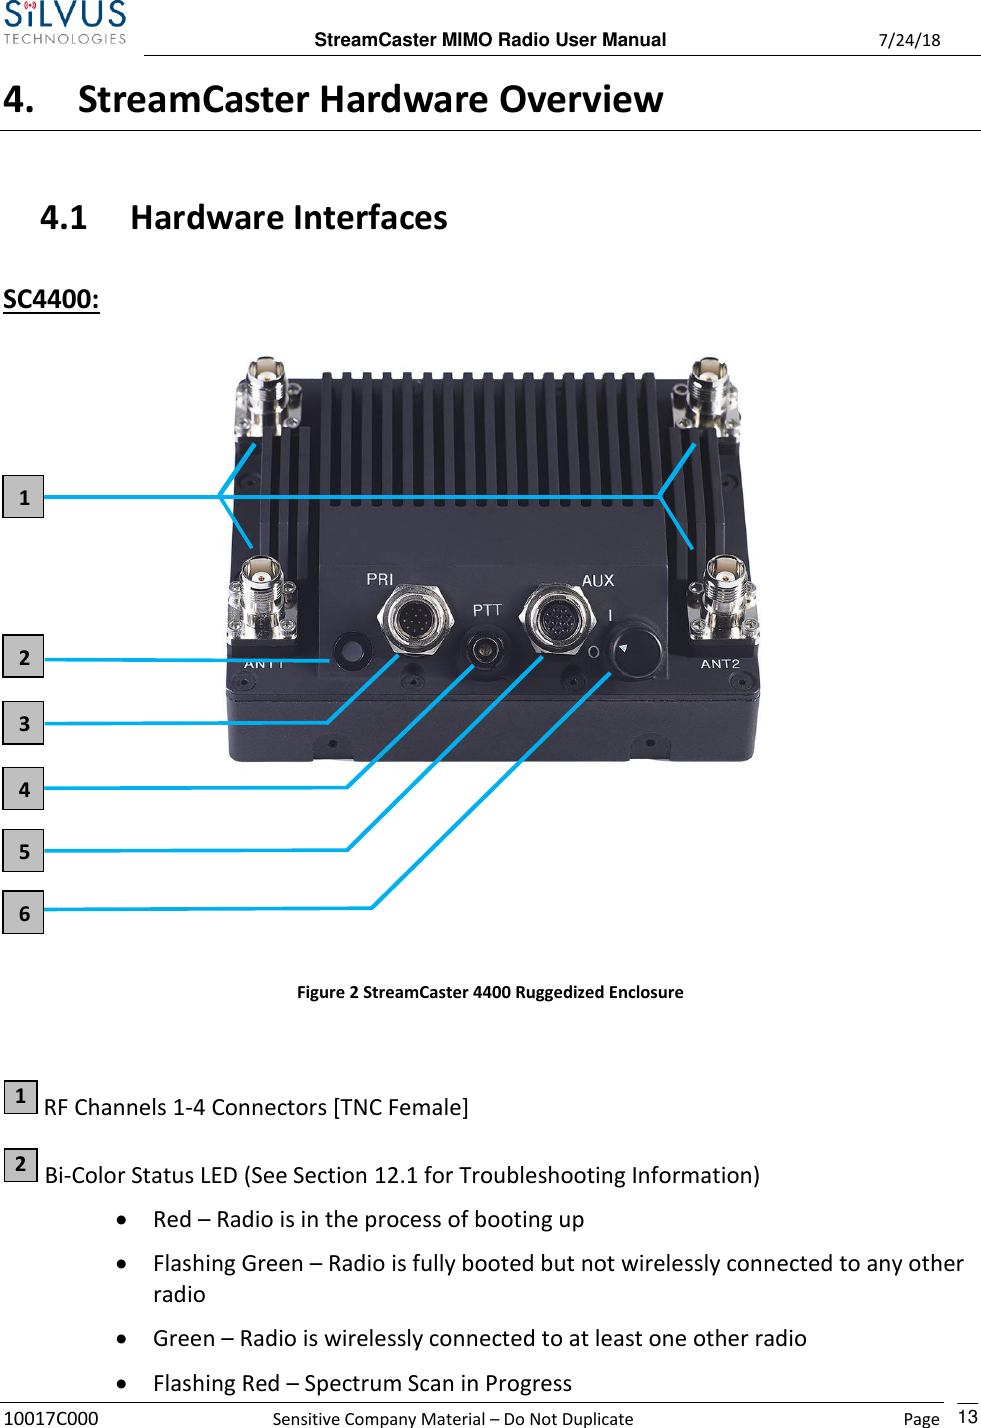  StreamCaster MIMO Radio User Manual  7/24/18 10017C000  Sensitive Company Material – Do Not Duplicate    Page    13 4. StreamCaster Hardware Overview 4.1 Hardware Interfaces SC4400:        Figure 2 StreamCaster 4400 Ruggedized Enclosure   RF Channels 1-4 Connectors [TNC Female]  Bi-Color Status LED (See Section 12.1 for Troubleshooting Information) • Red – Radio is in the process of booting up • Flashing Green – Radio is fully booted but not wirelessly connected to any other radio • Green – Radio is wirelessly connected to at least one other radio • Flashing Red – Spectrum Scan in Progress 1 2 1 2 3 5 4 6 